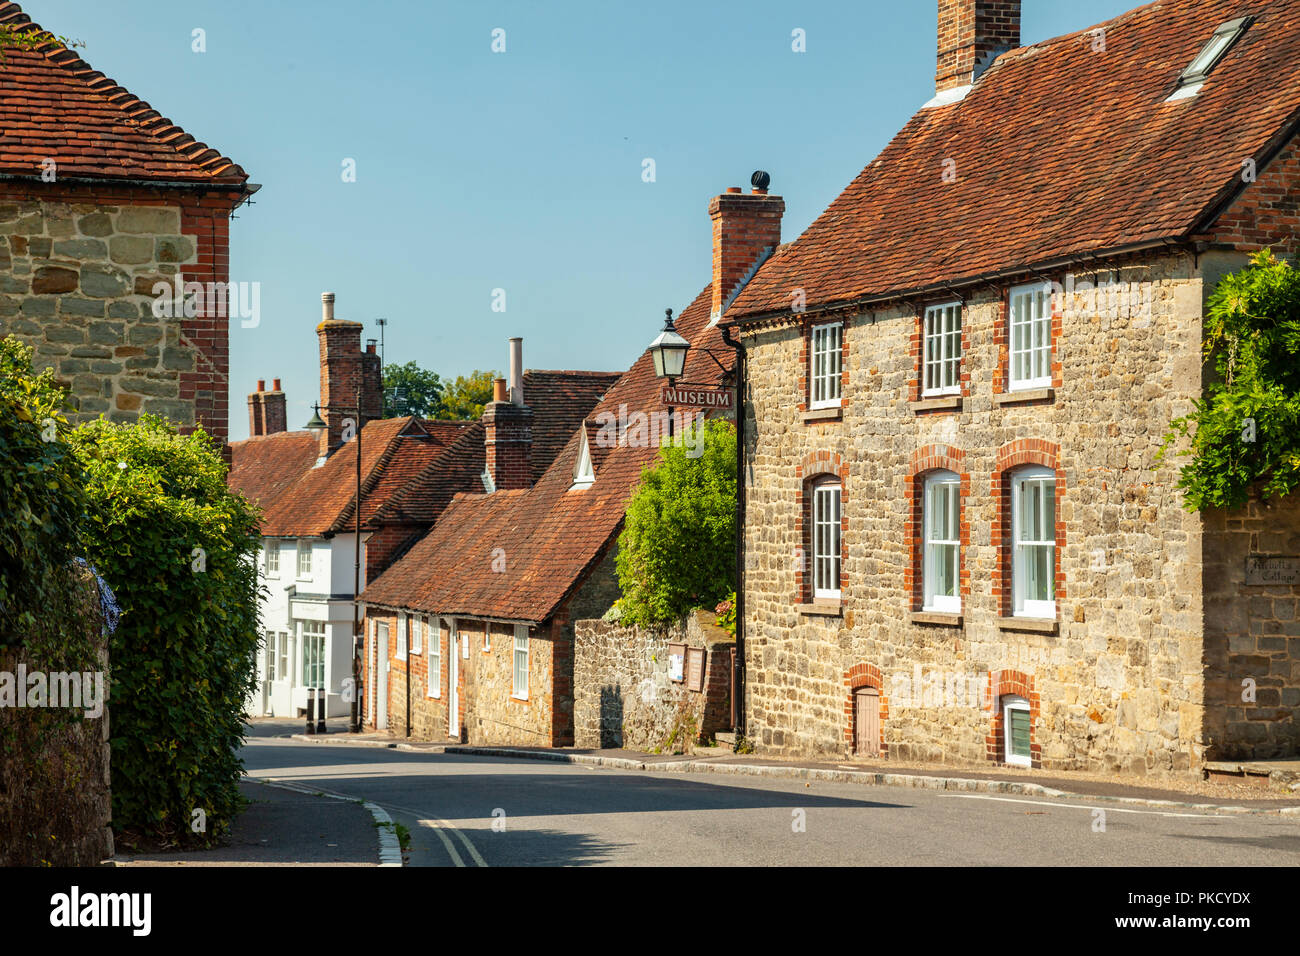 Sommer am Nachmittag in Petworth, West Sussex, England. Stockfoto